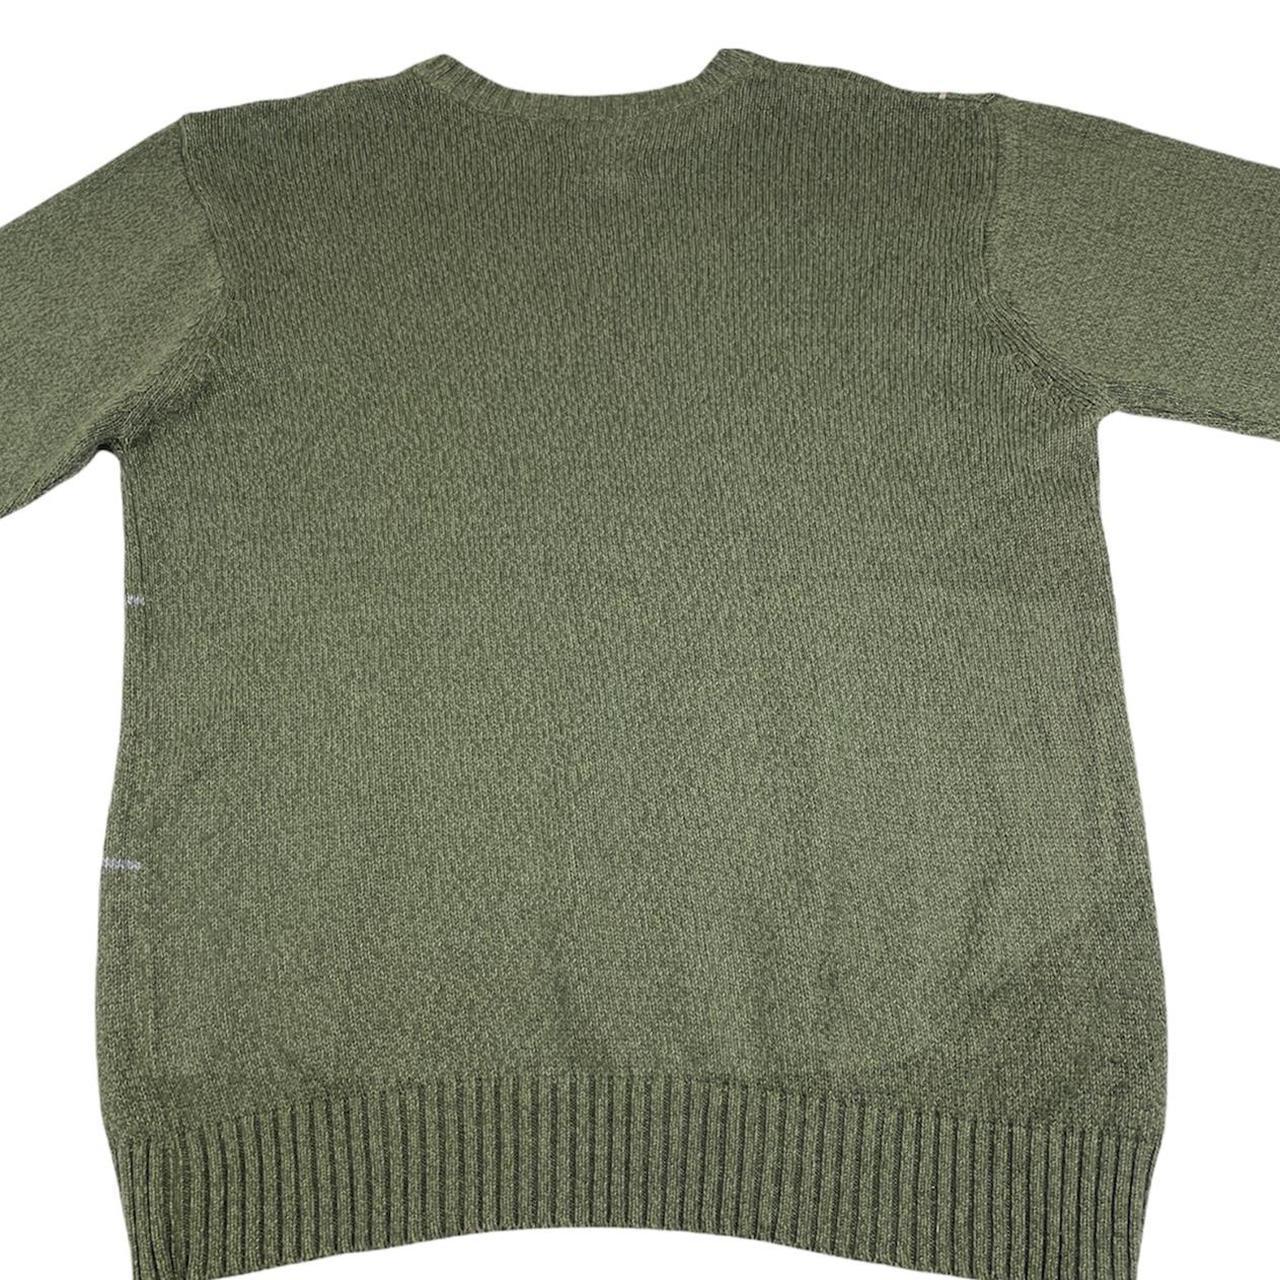 Product Image 2 - Men’s knitted Jumper/Basic editions 